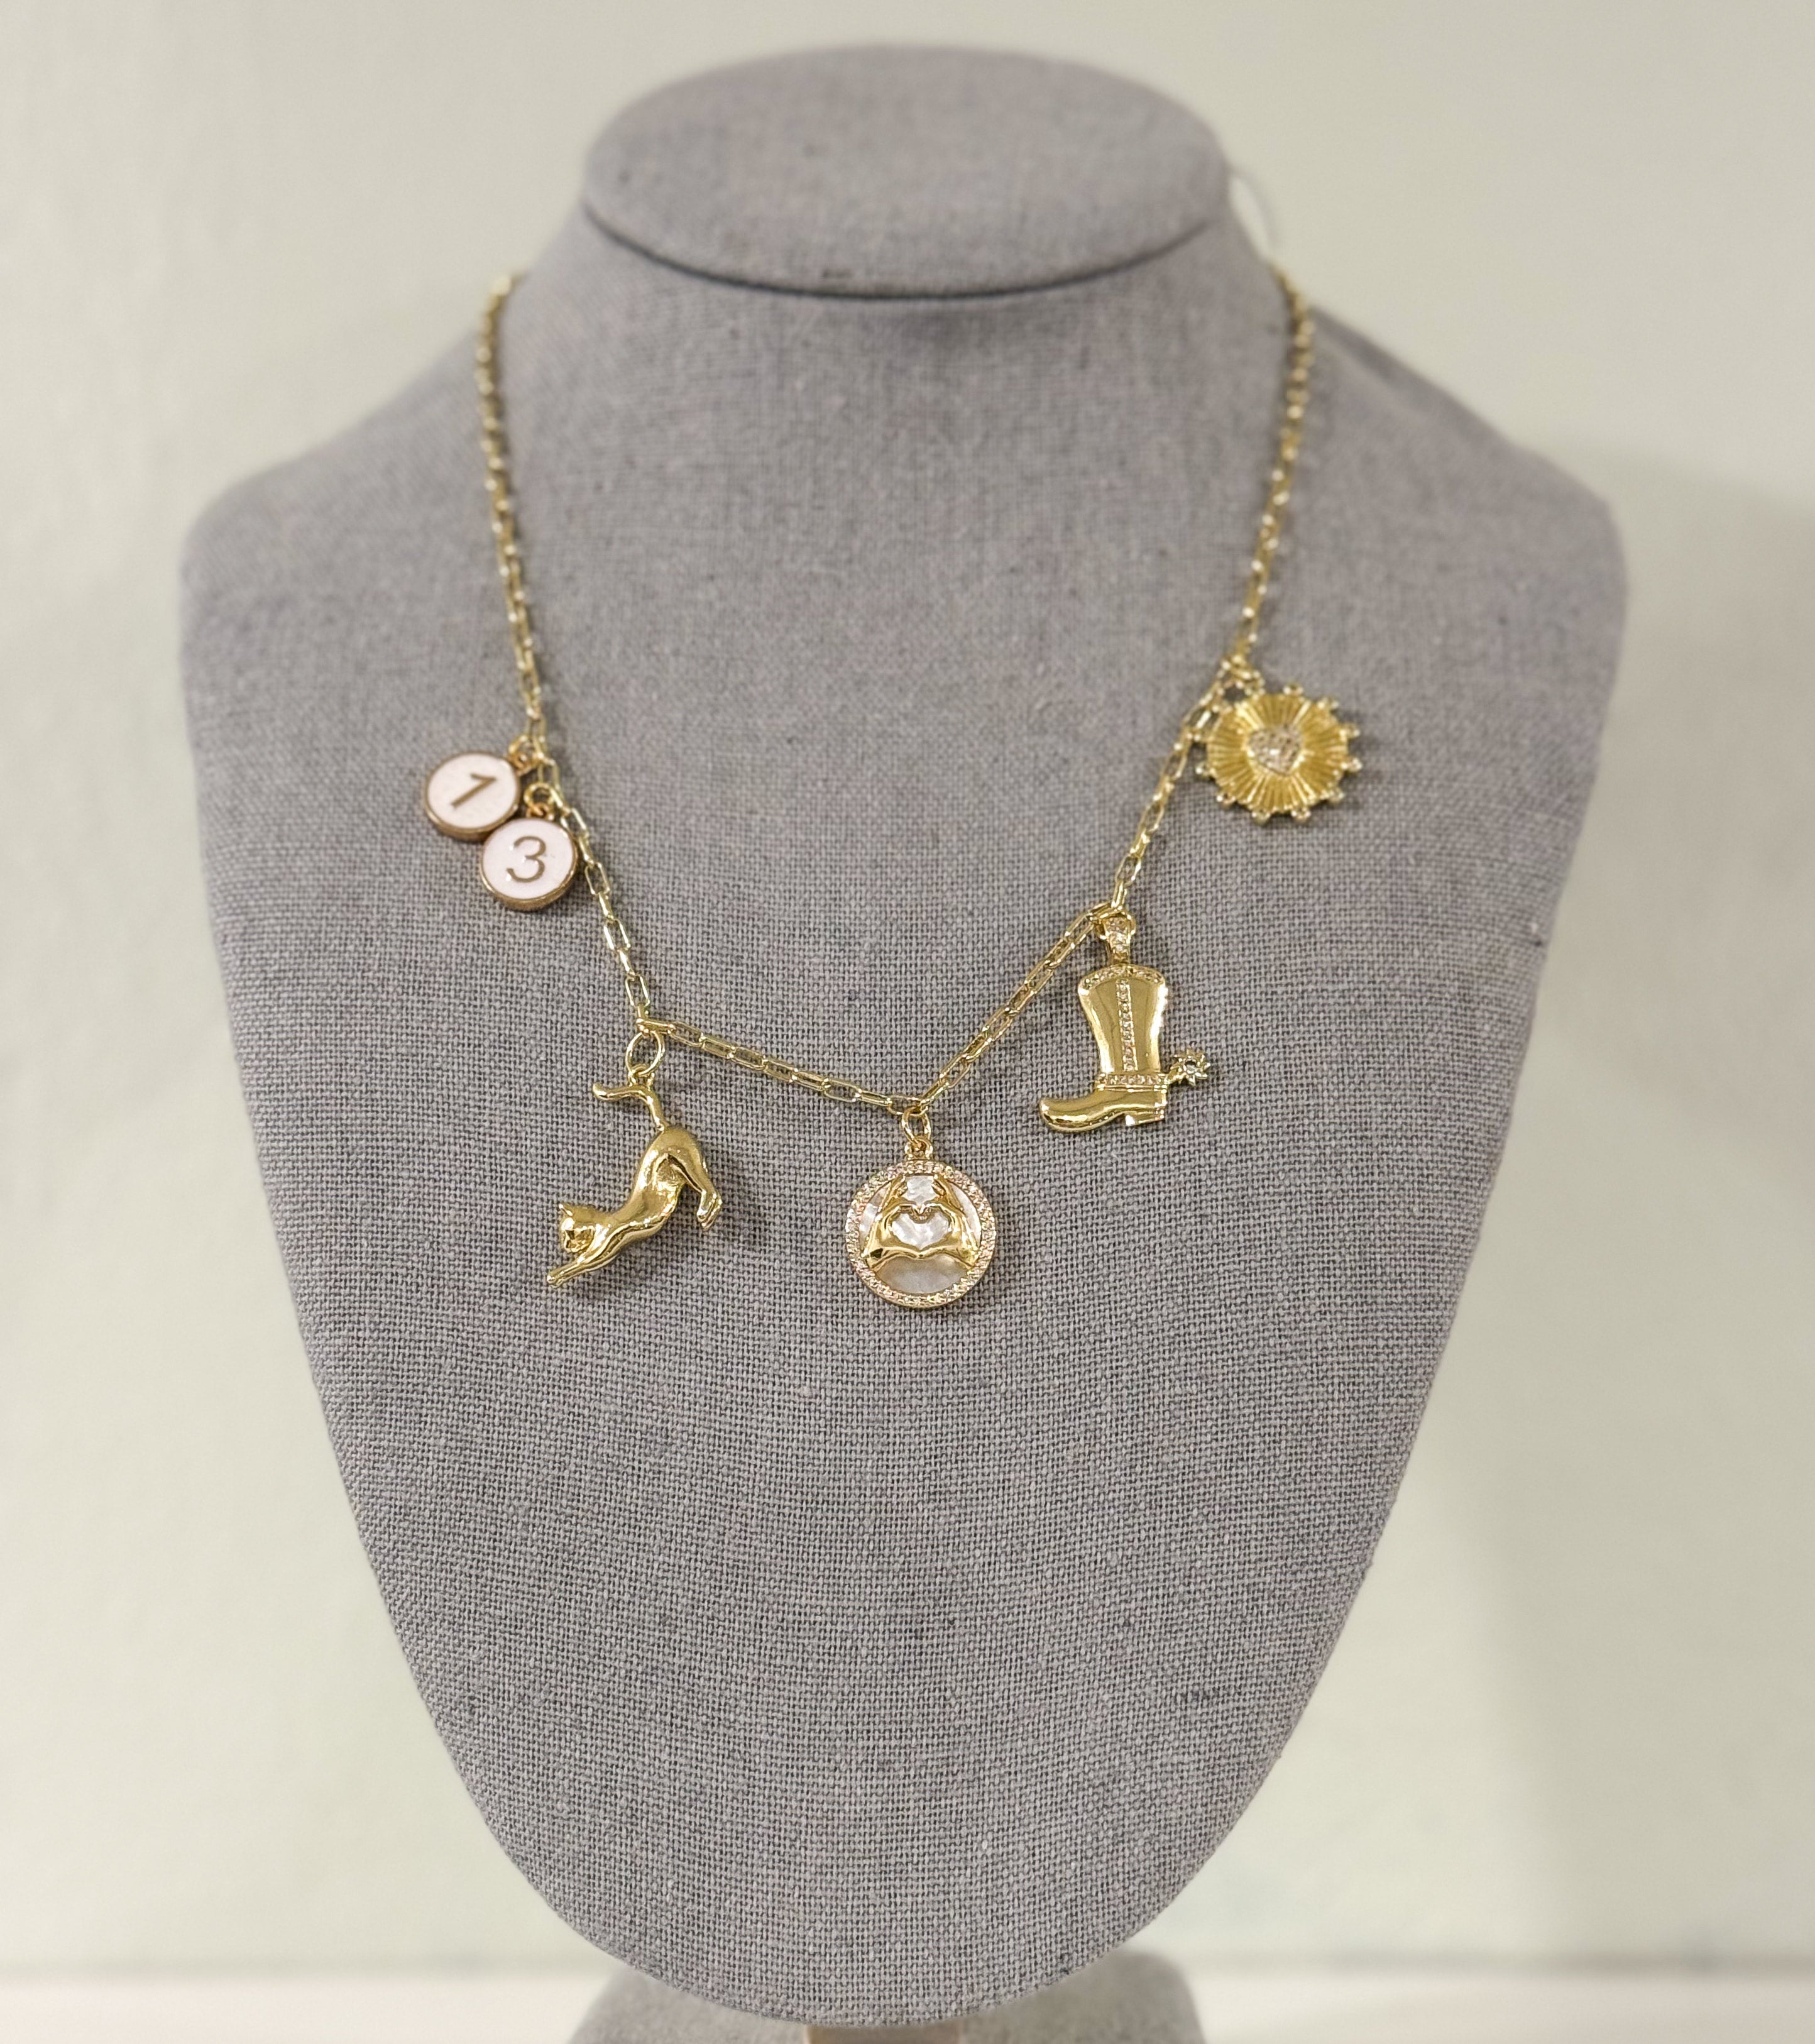 Necklaces | Collections by Joya